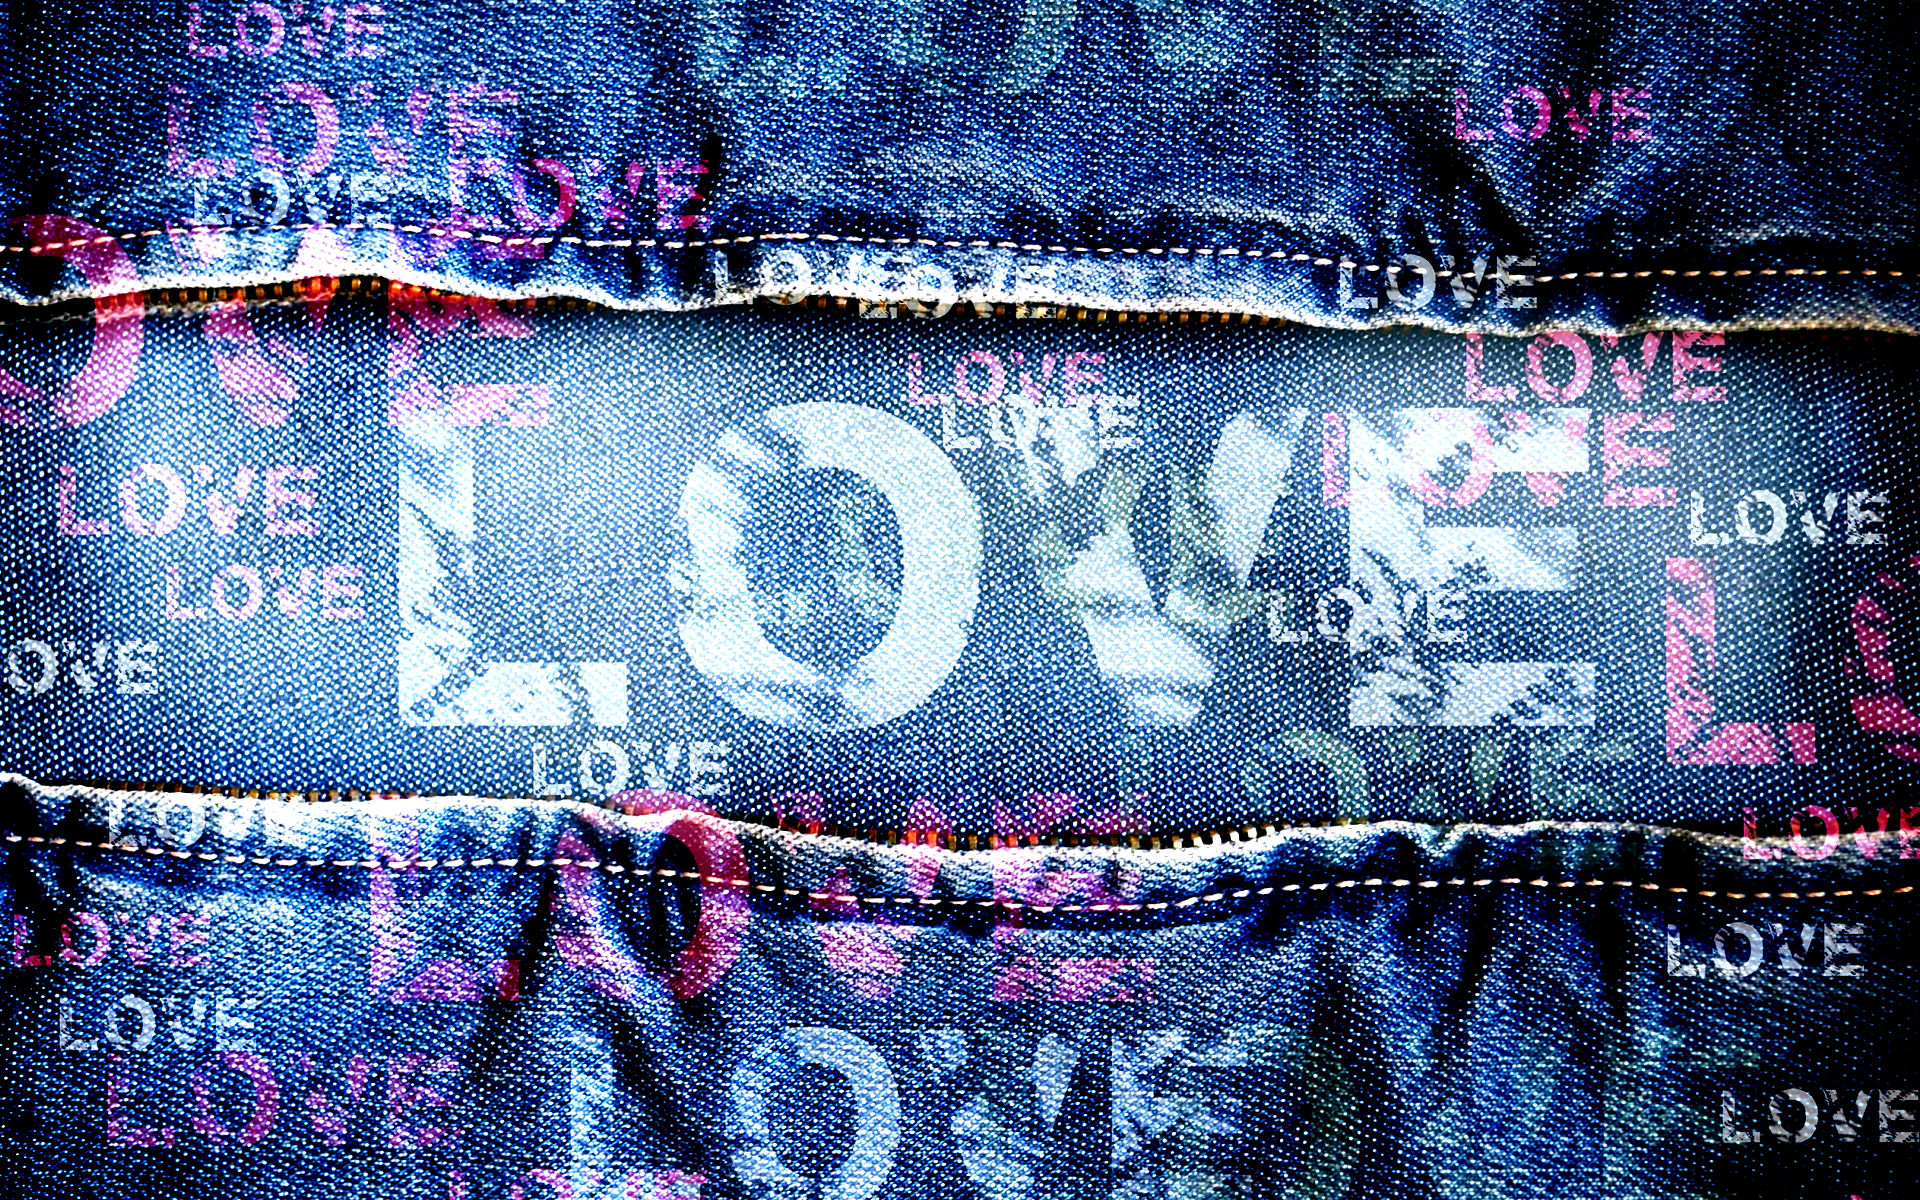  Valentine's Day HQ Background Images